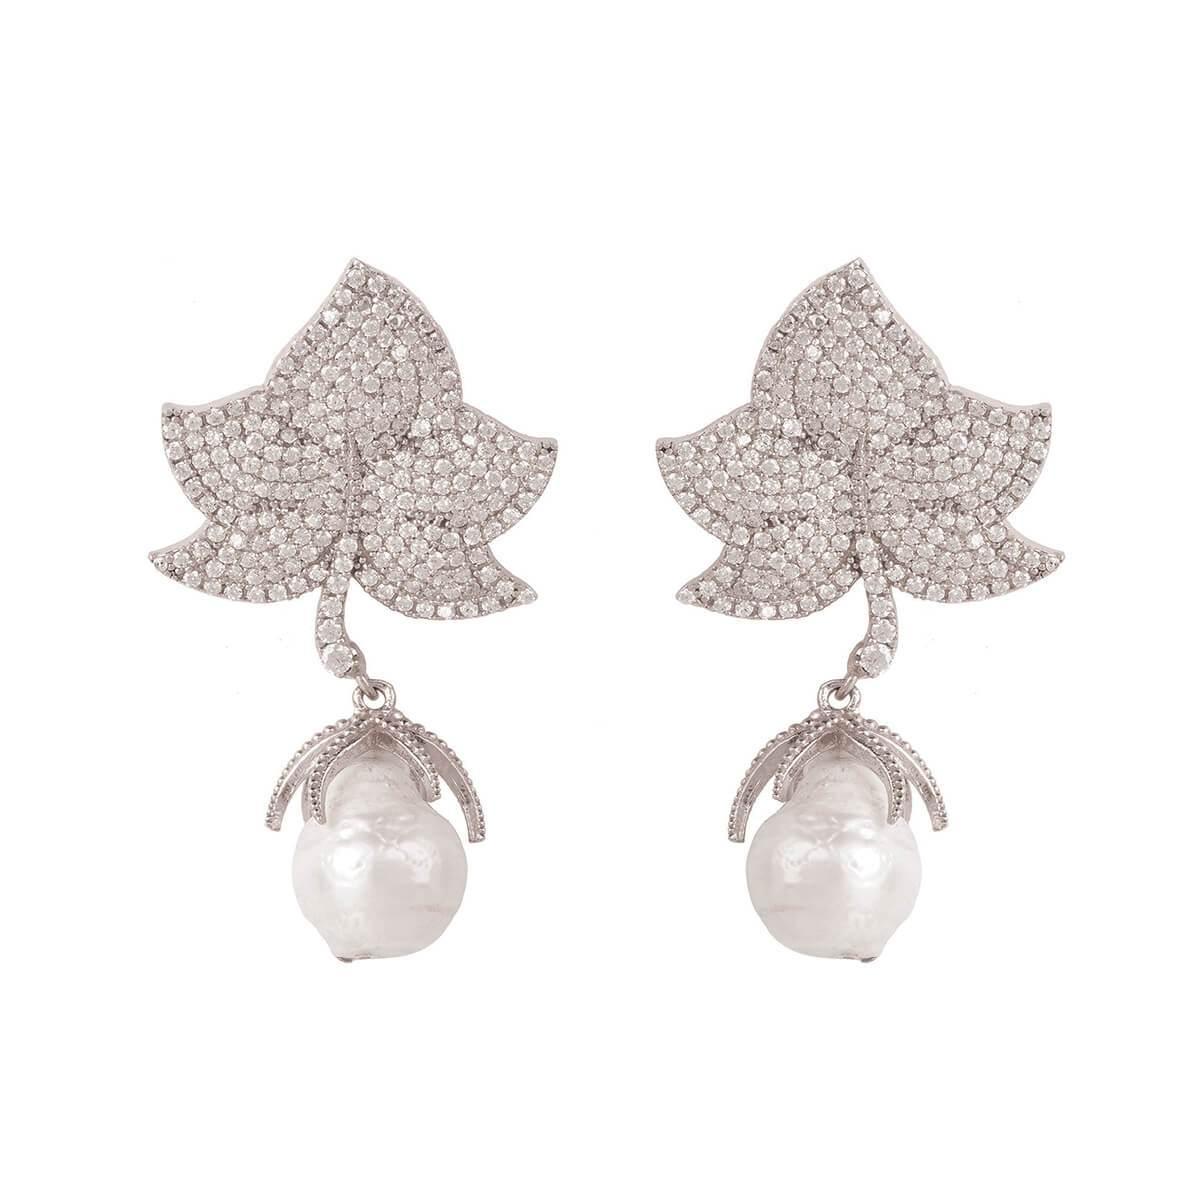 LÁTELITA London Rhodium Plated Baroque Pearl Leaf Earring With White Cz ...